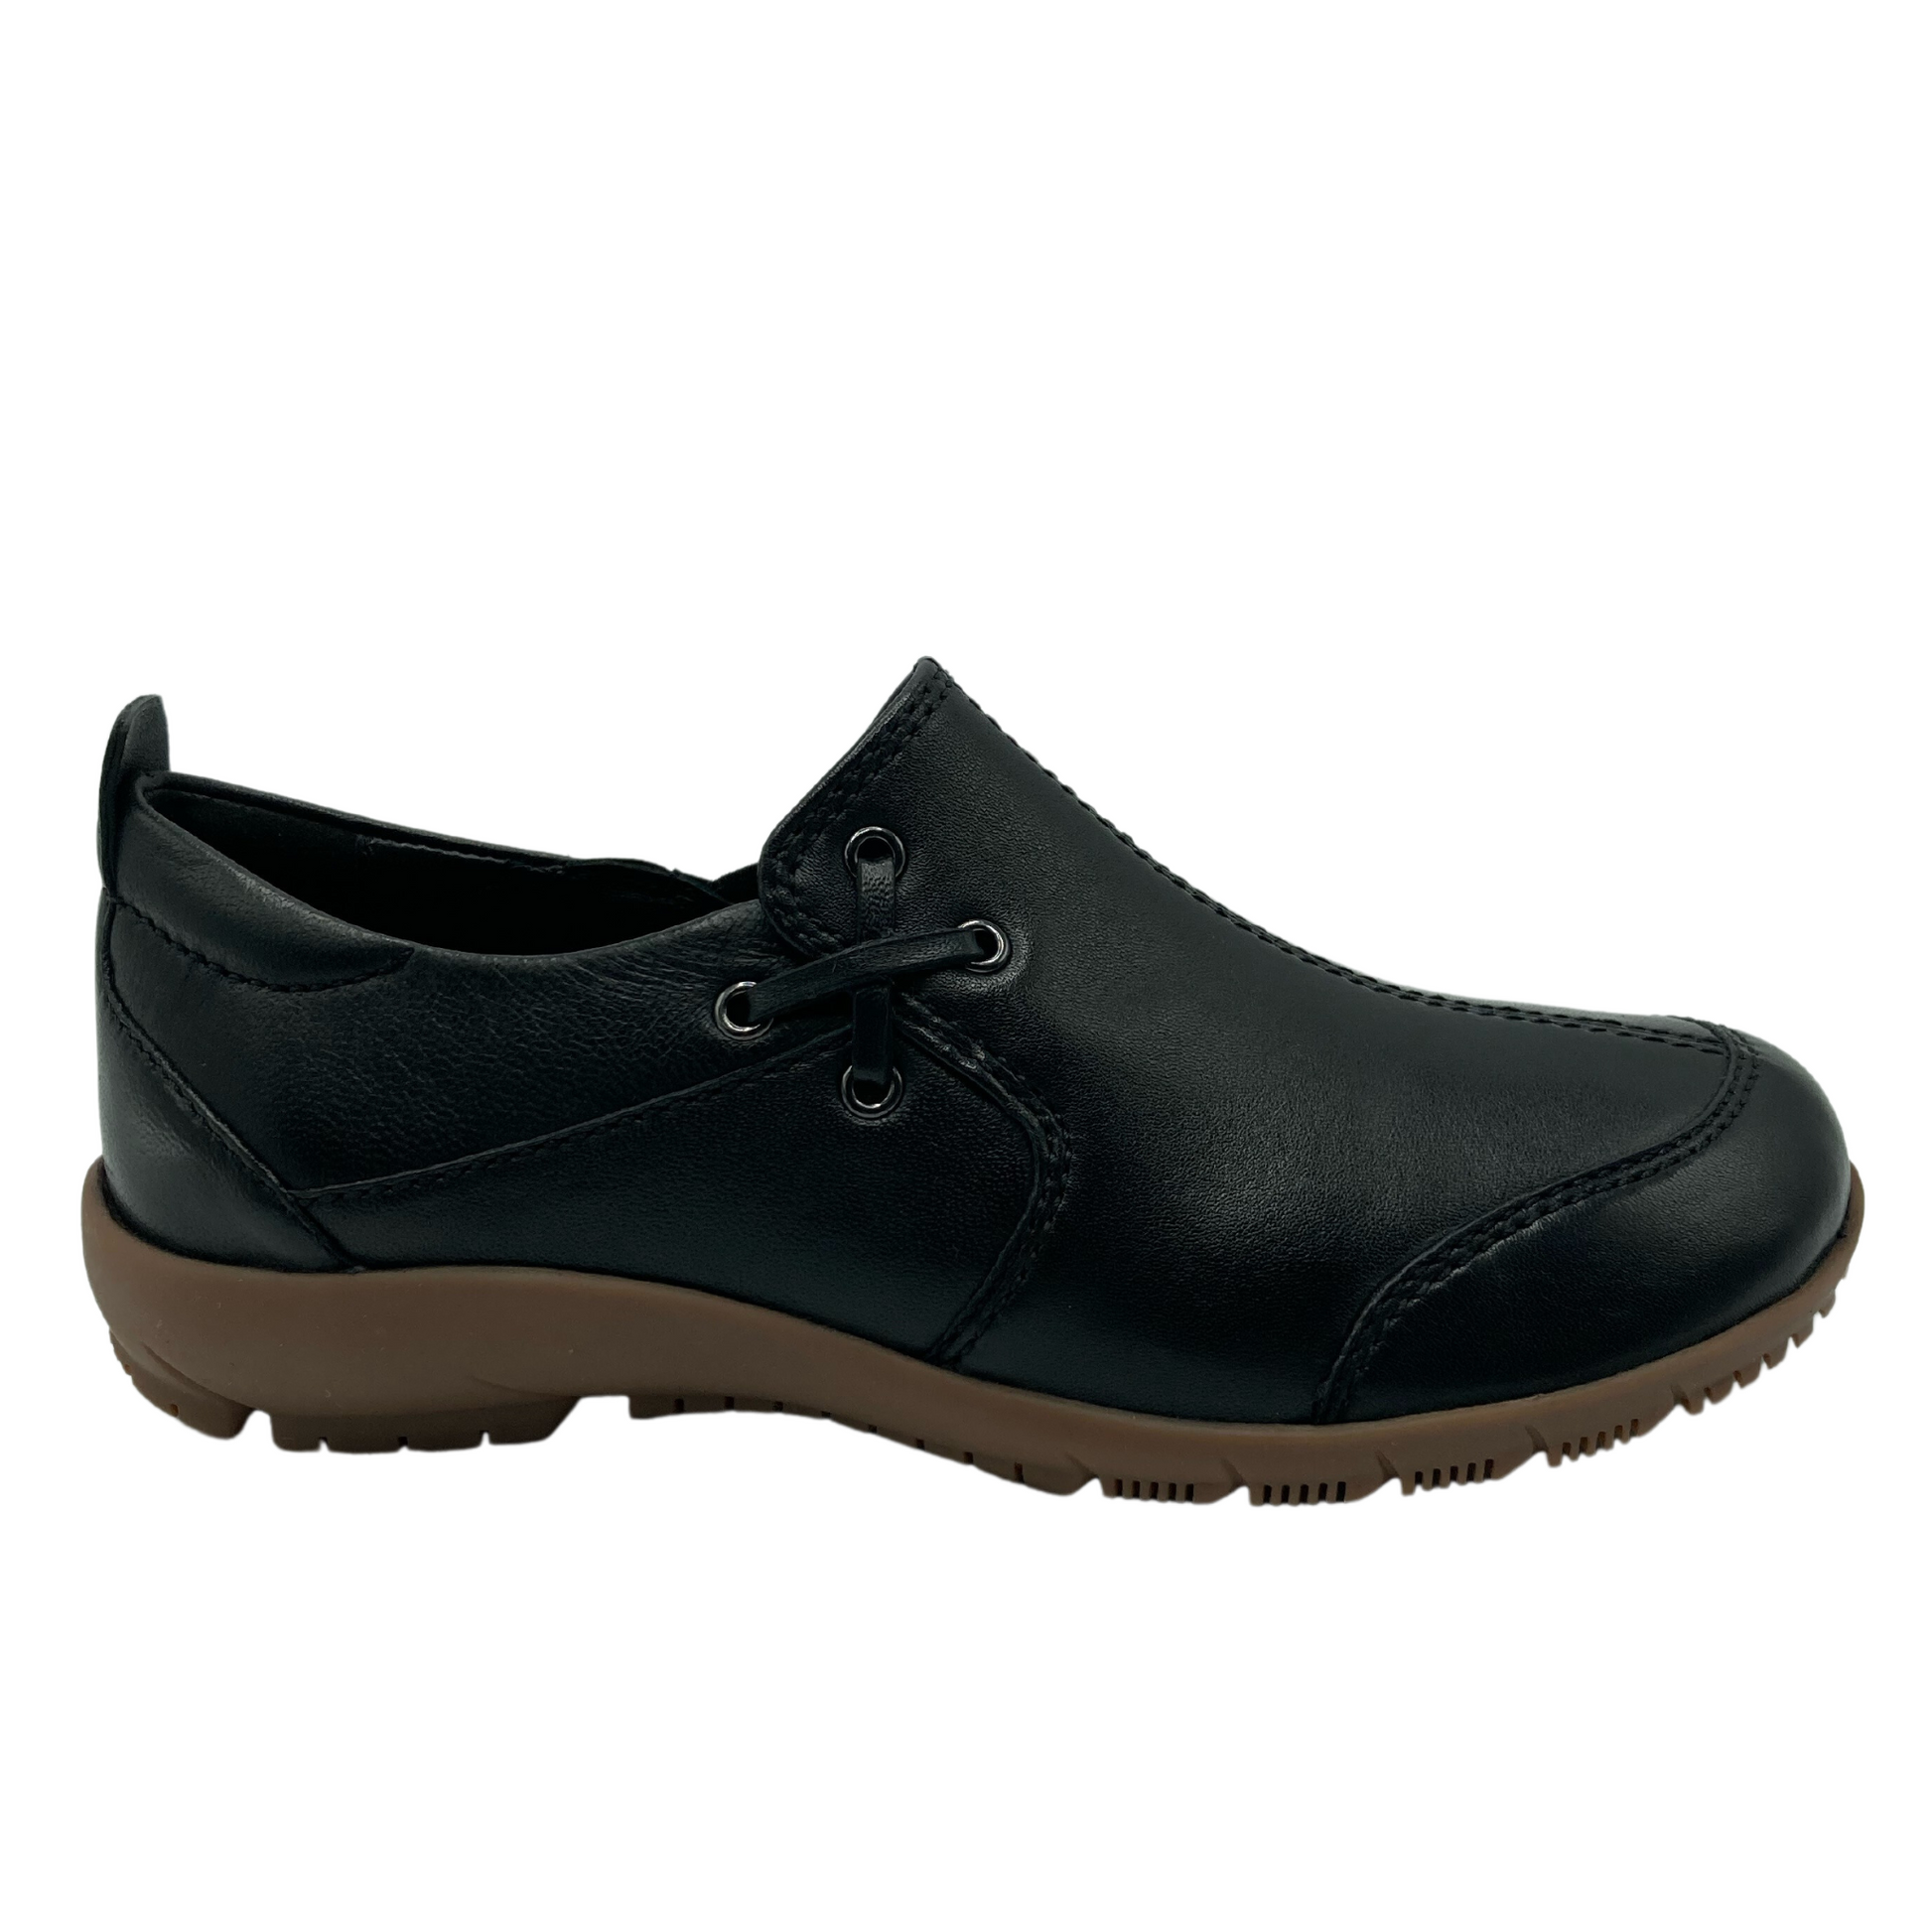 Right facing view of black leather shoe with crossed lace detail on the side with a brown rubber outsole